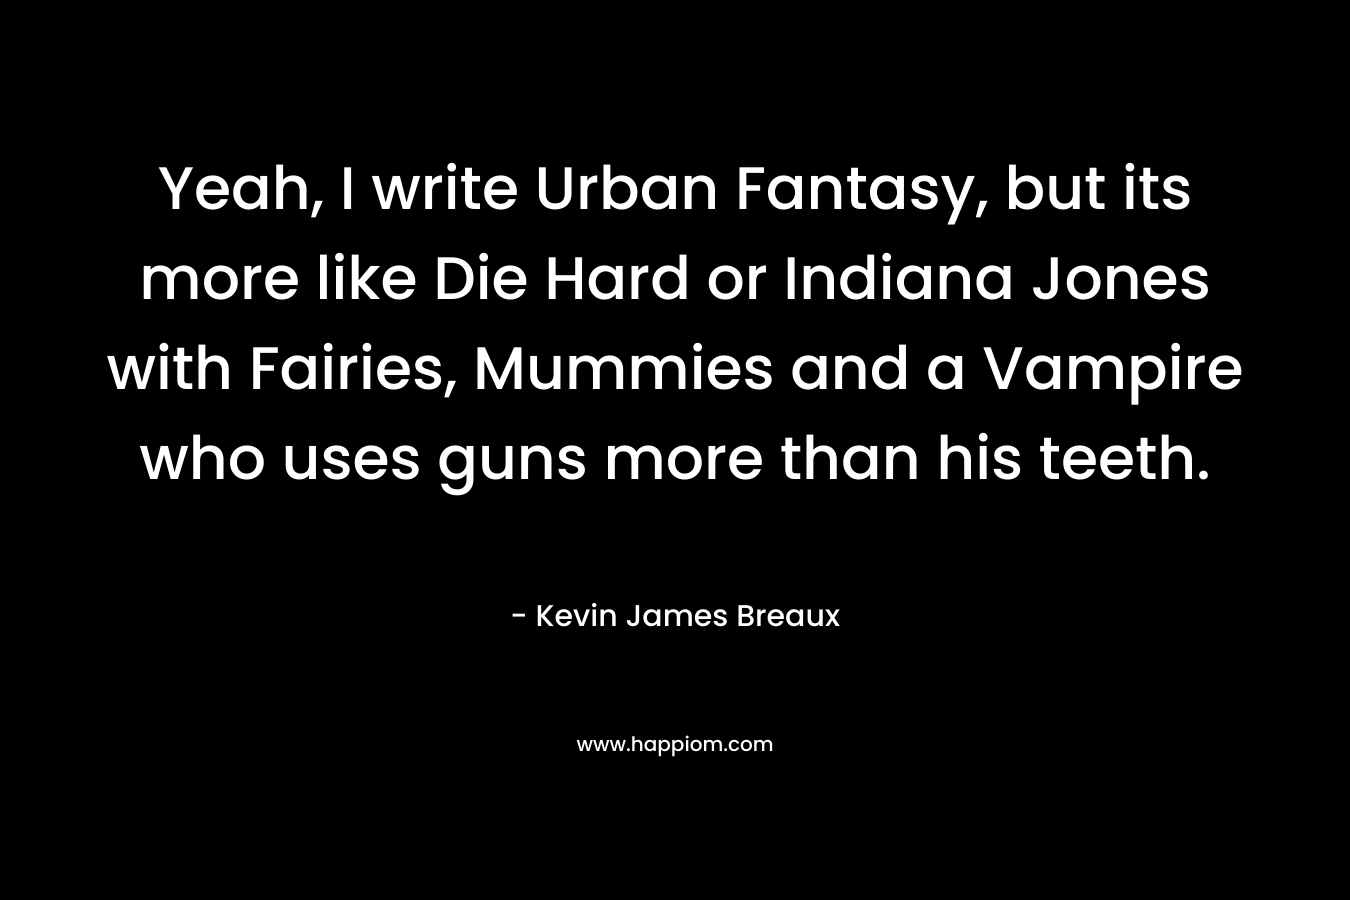 Yeah, I write Urban Fantasy, but its more like Die Hard or Indiana Jones with Fairies, Mummies and a Vampire who uses guns more than his teeth. – Kevin James Breaux